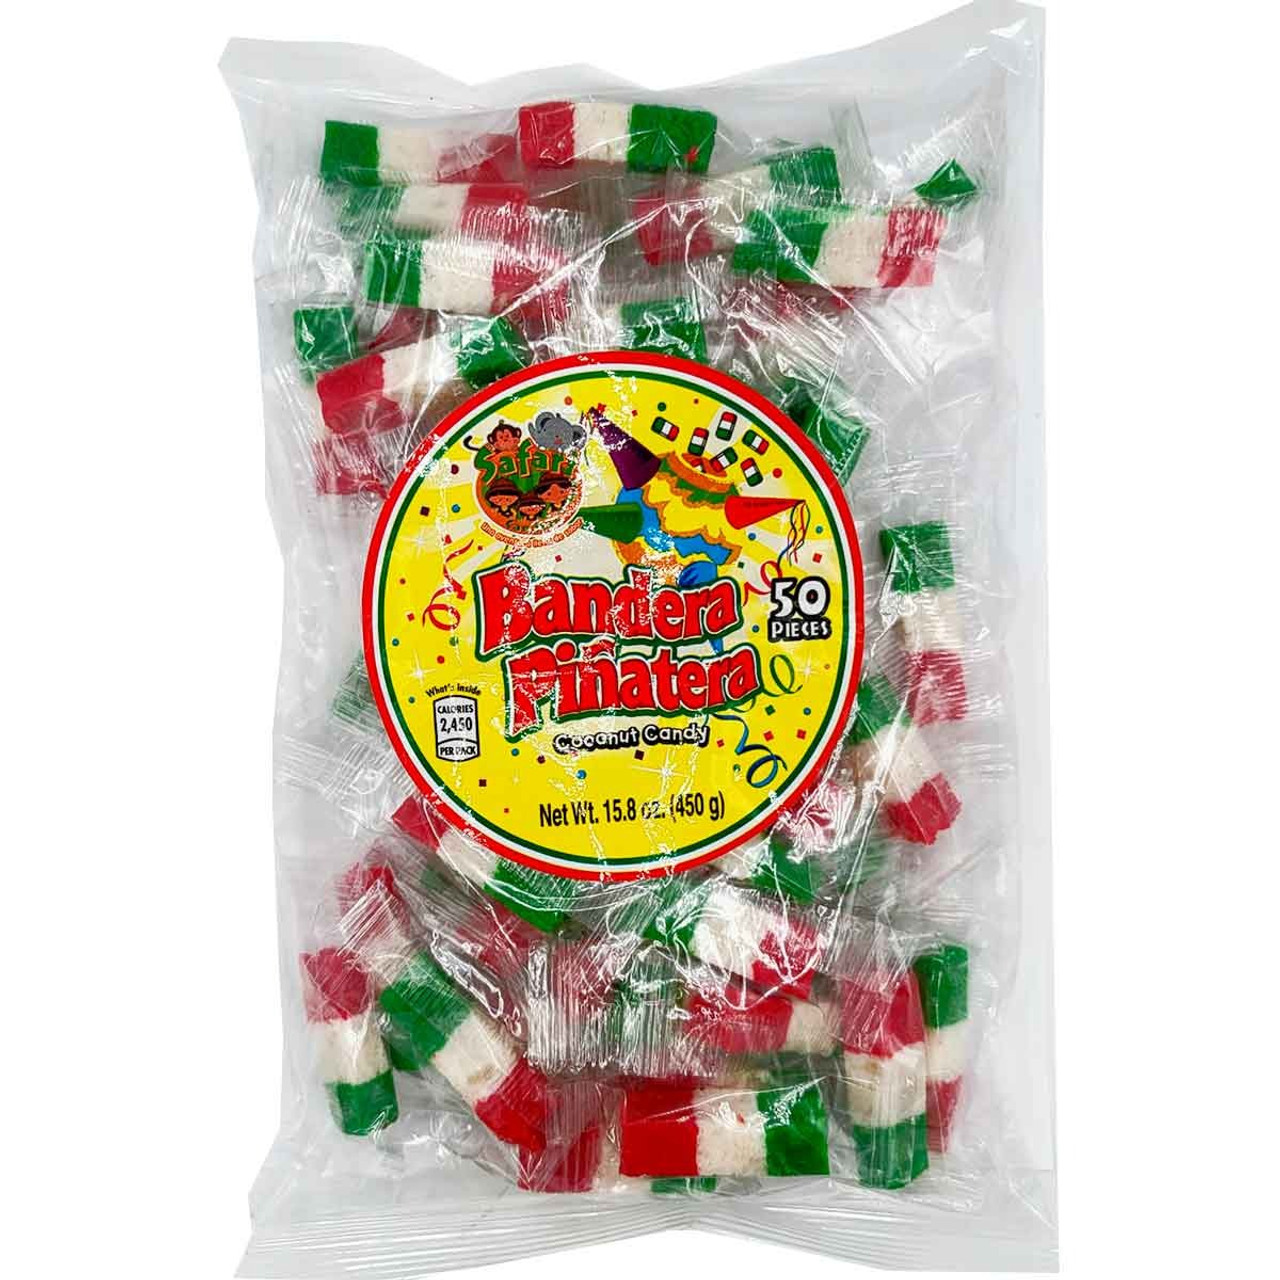 Mexican Flag Candy Bar with a really sweet and tasty flavor of grated coconut and sugar. Presentation of 50 pieces per package.